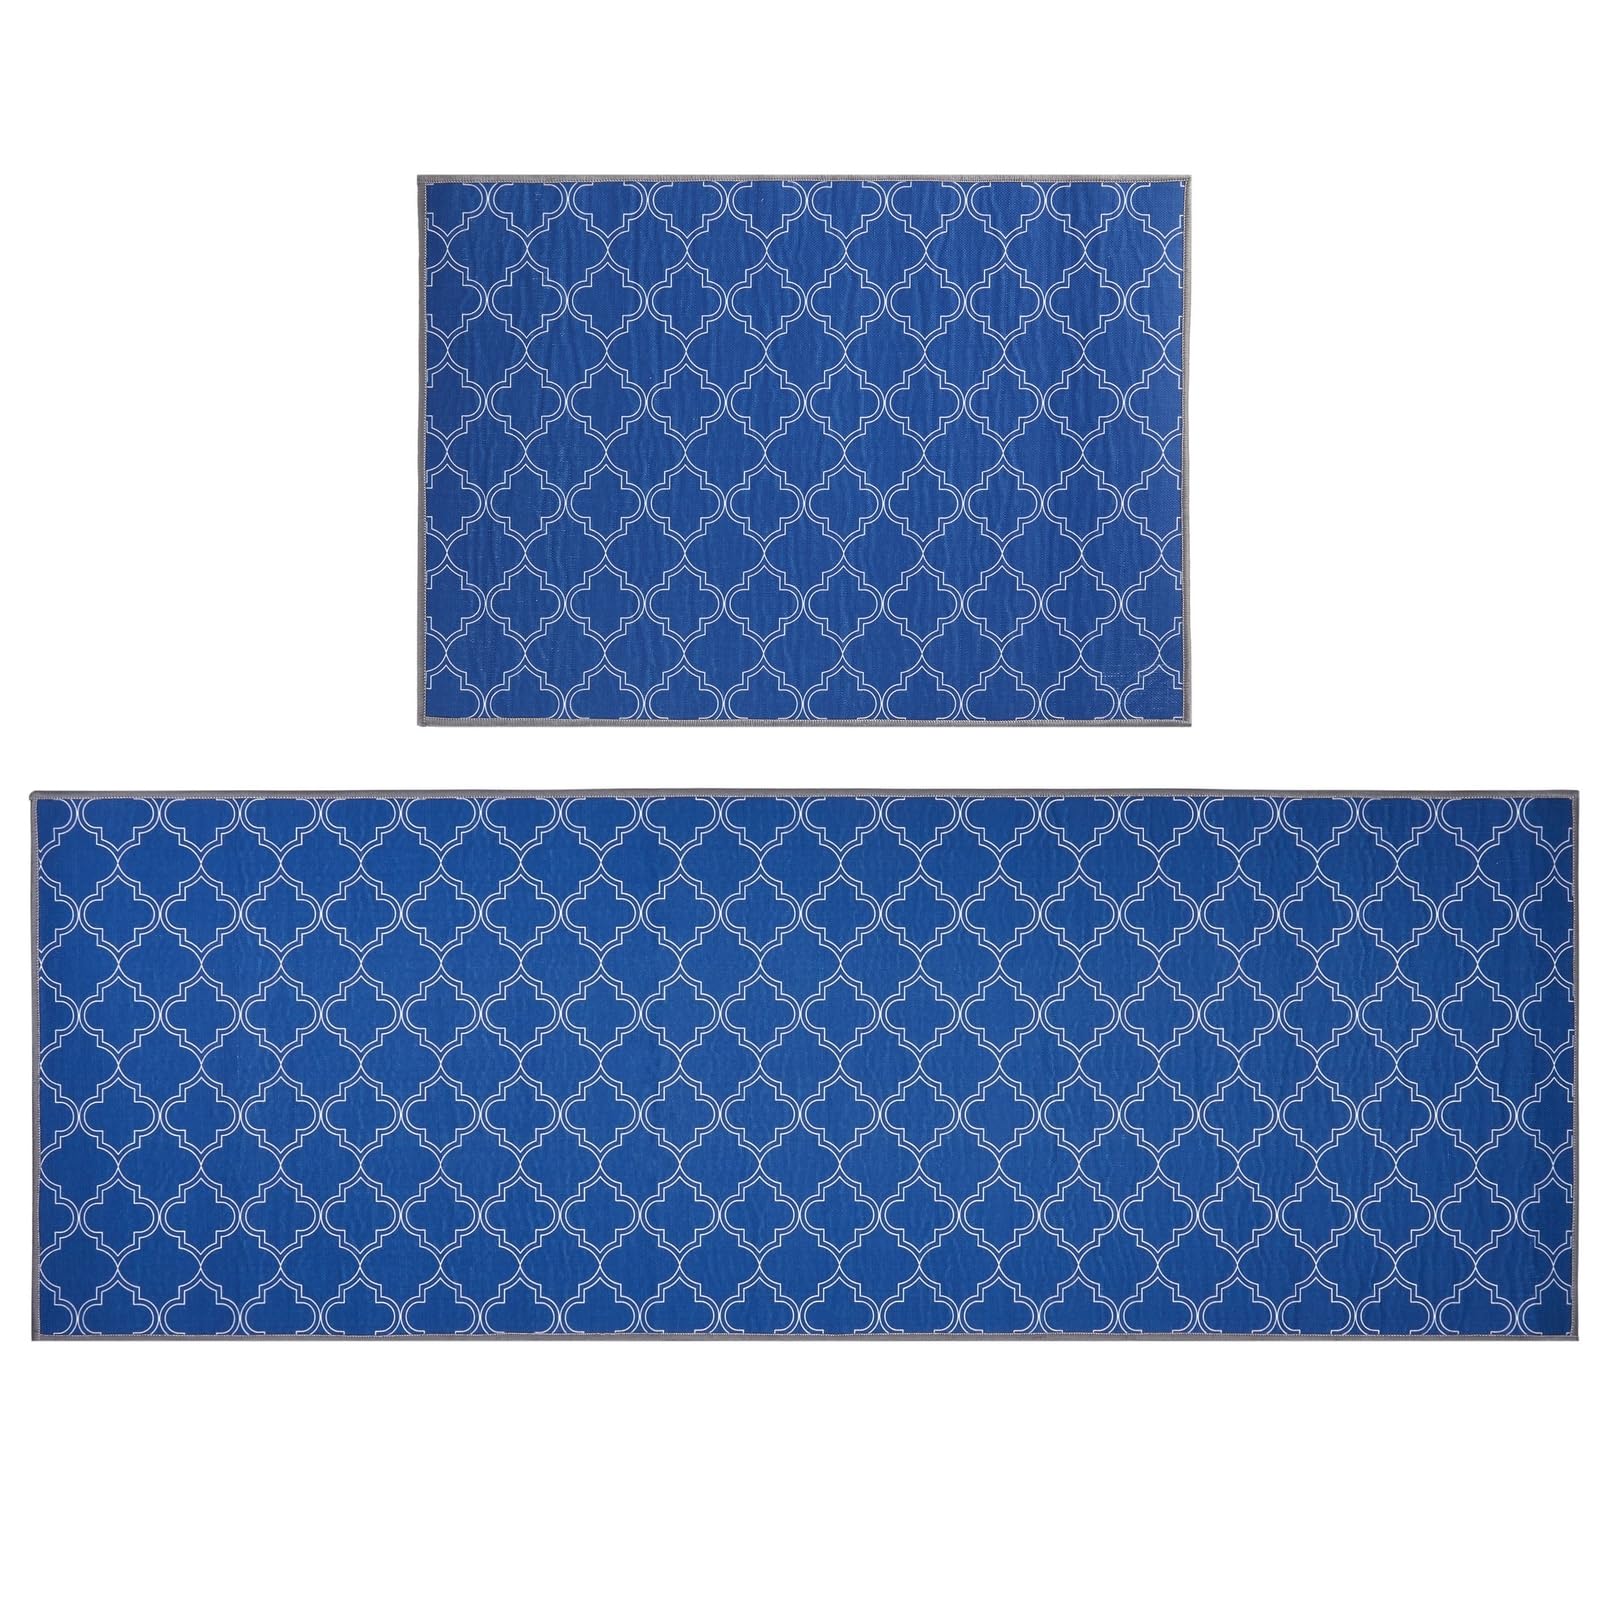 Okuna Outpost 2 Pack Navy Blue Kitchen Mats, Slip-Resistant Runner and Mat for Dining Room Floor, Sink, Laundry, Office (47.5 x 17 and 23.5 x 17 in)